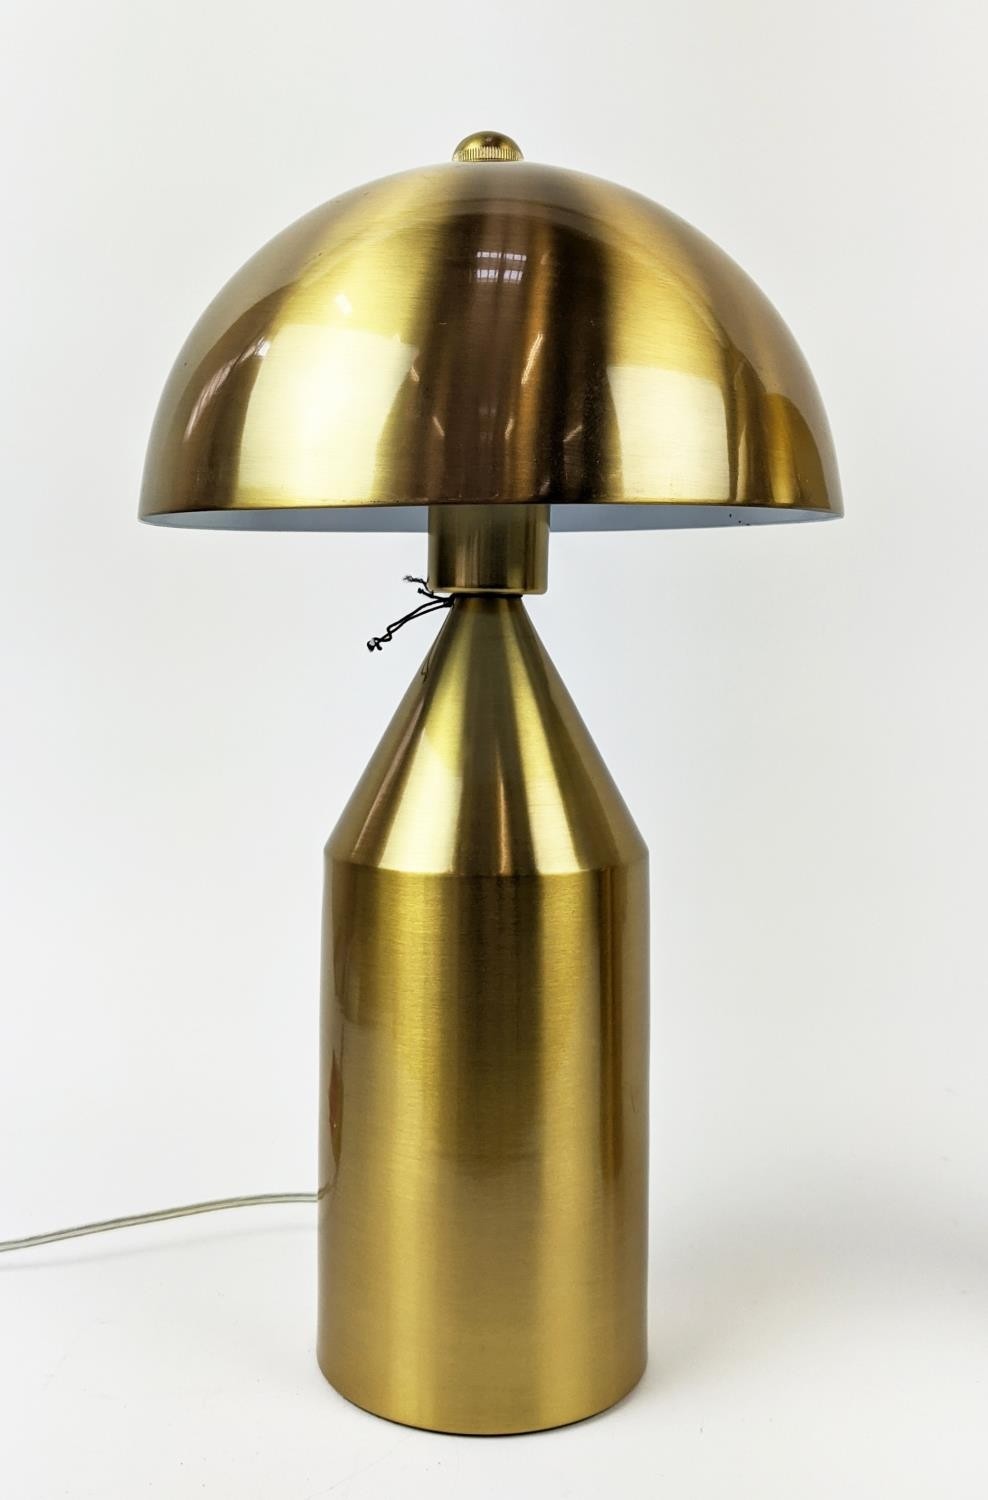 VICO MAGISTRETTI STYLE TABLE LAMPS, a pair, gilt metal, 44cm H approx. (2) - Image 4 of 6